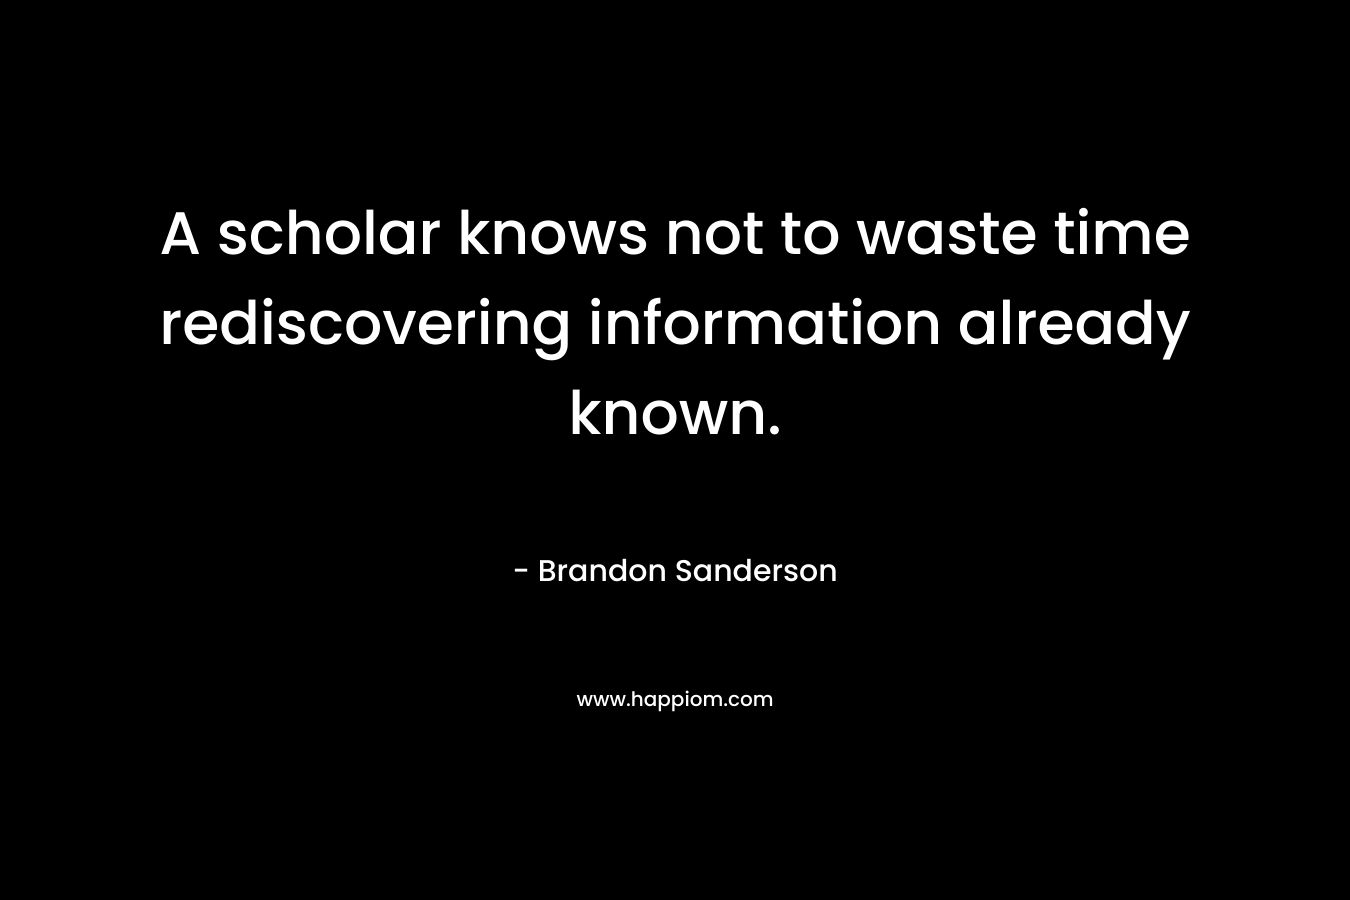 A scholar knows not to waste time rediscovering information already known. – Brandon Sanderson